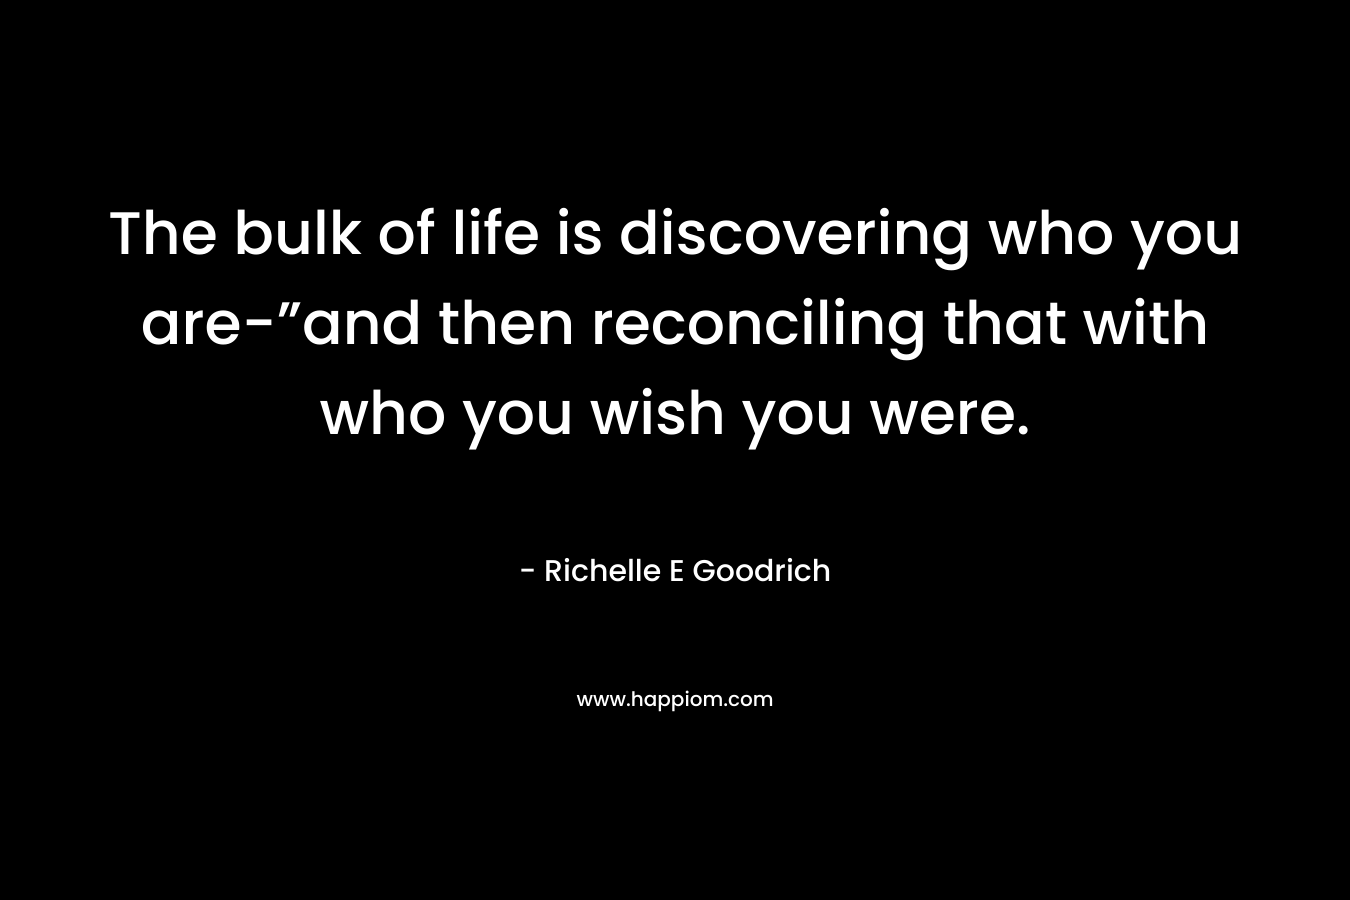 The bulk of life is discovering who you are-”and then reconciling that with who you wish you were.